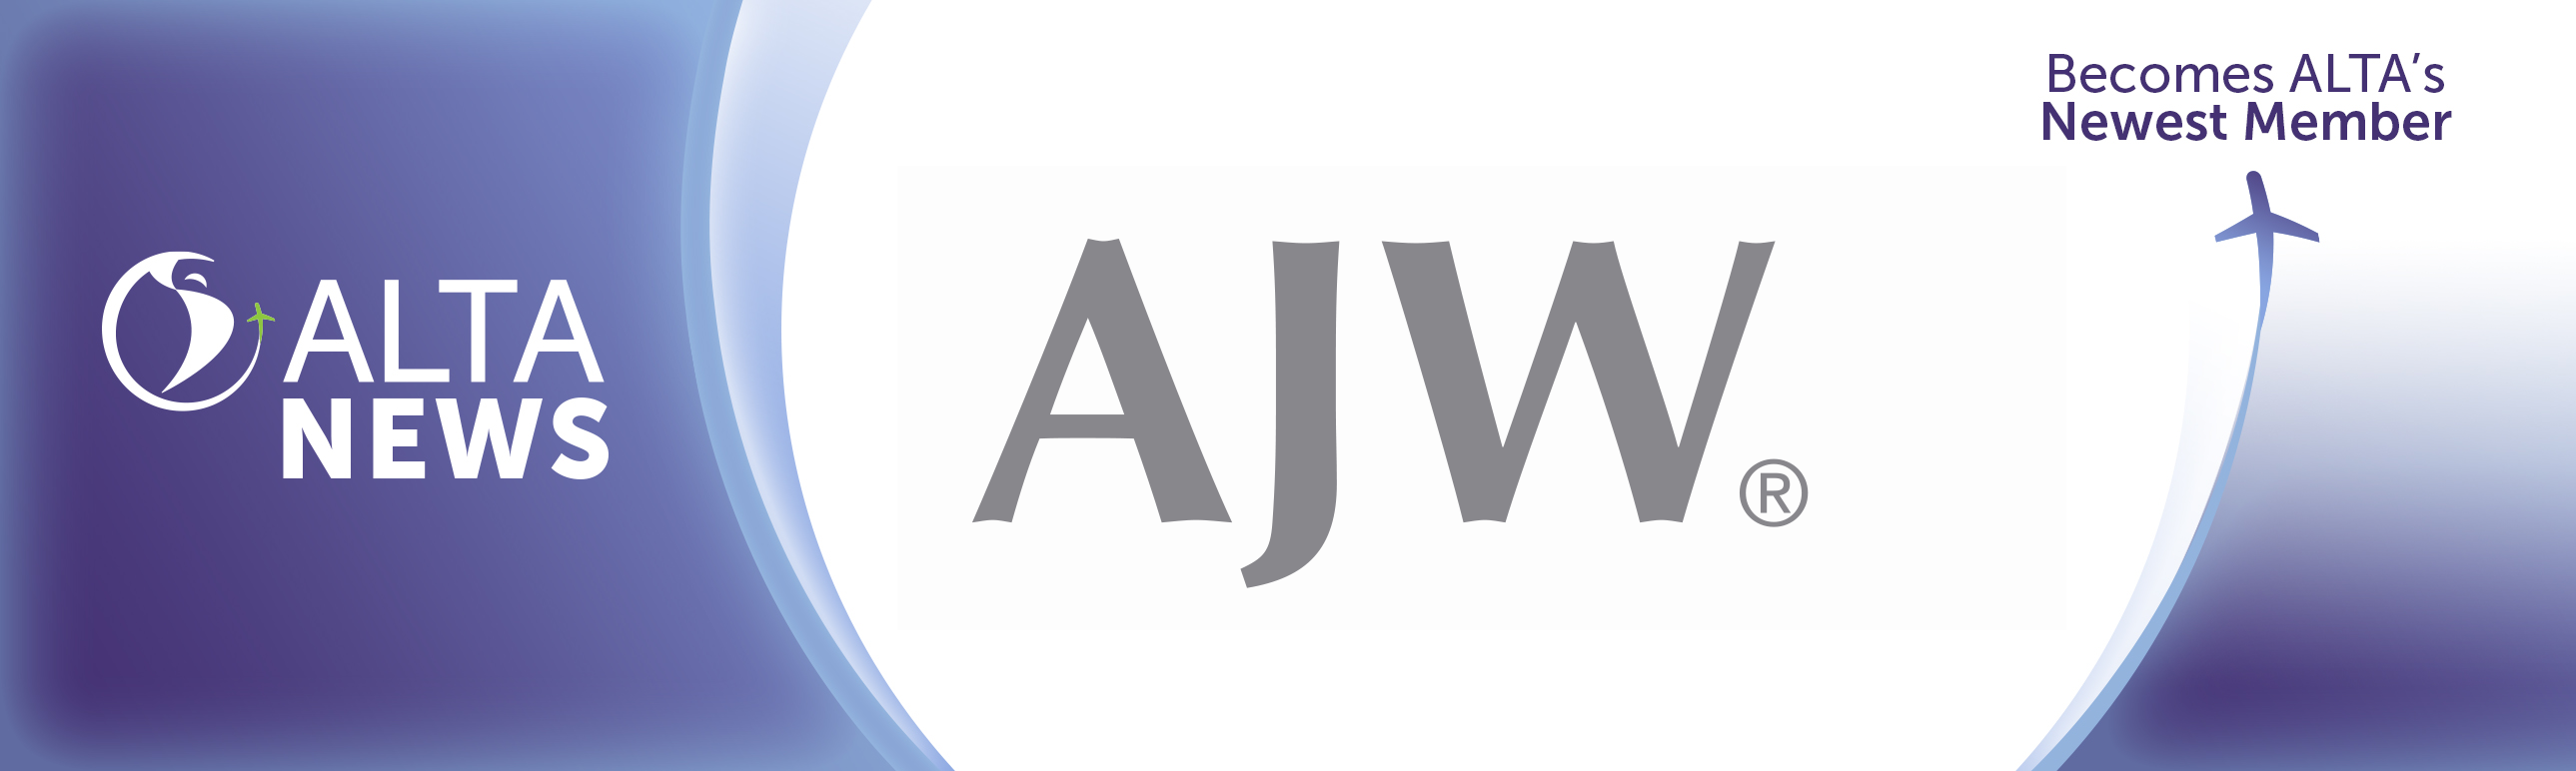 ALTA NEWS - AJW Group continues to expand in Latin America by joining ALTA